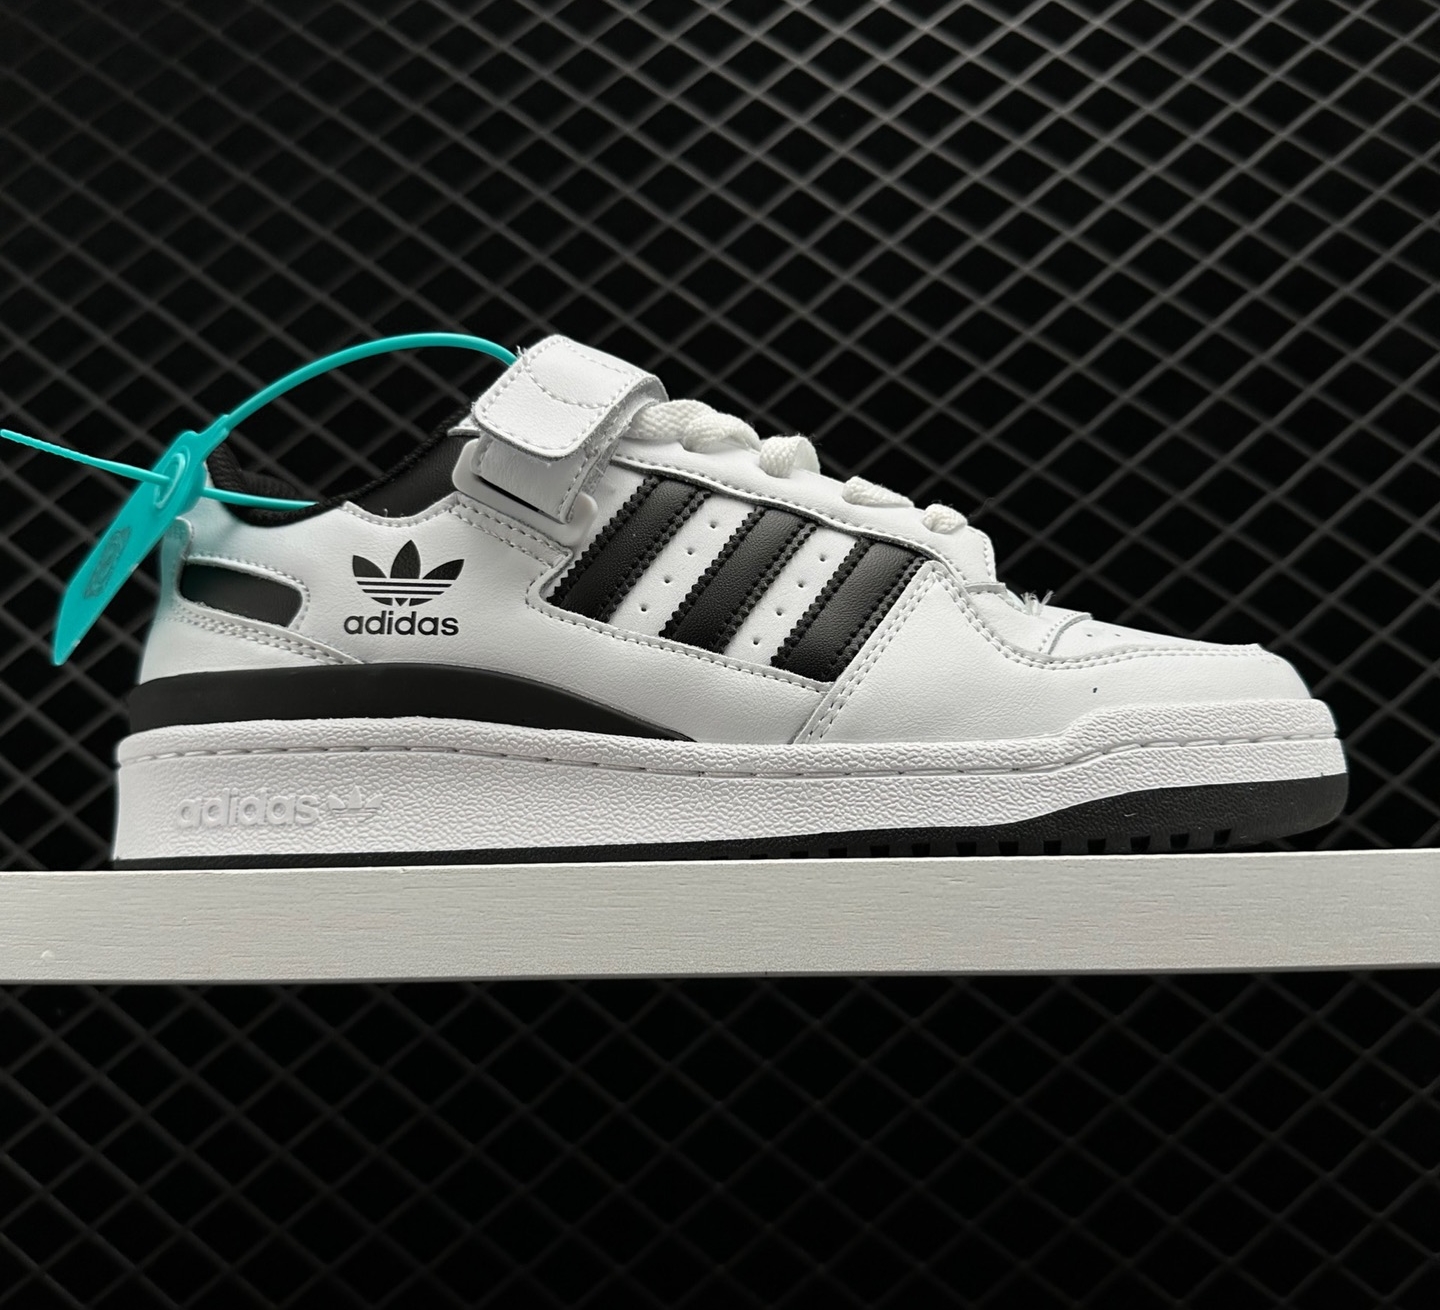 Adidas Forum Low 'White Black' FY7757 - Classic Style and Timeless Design